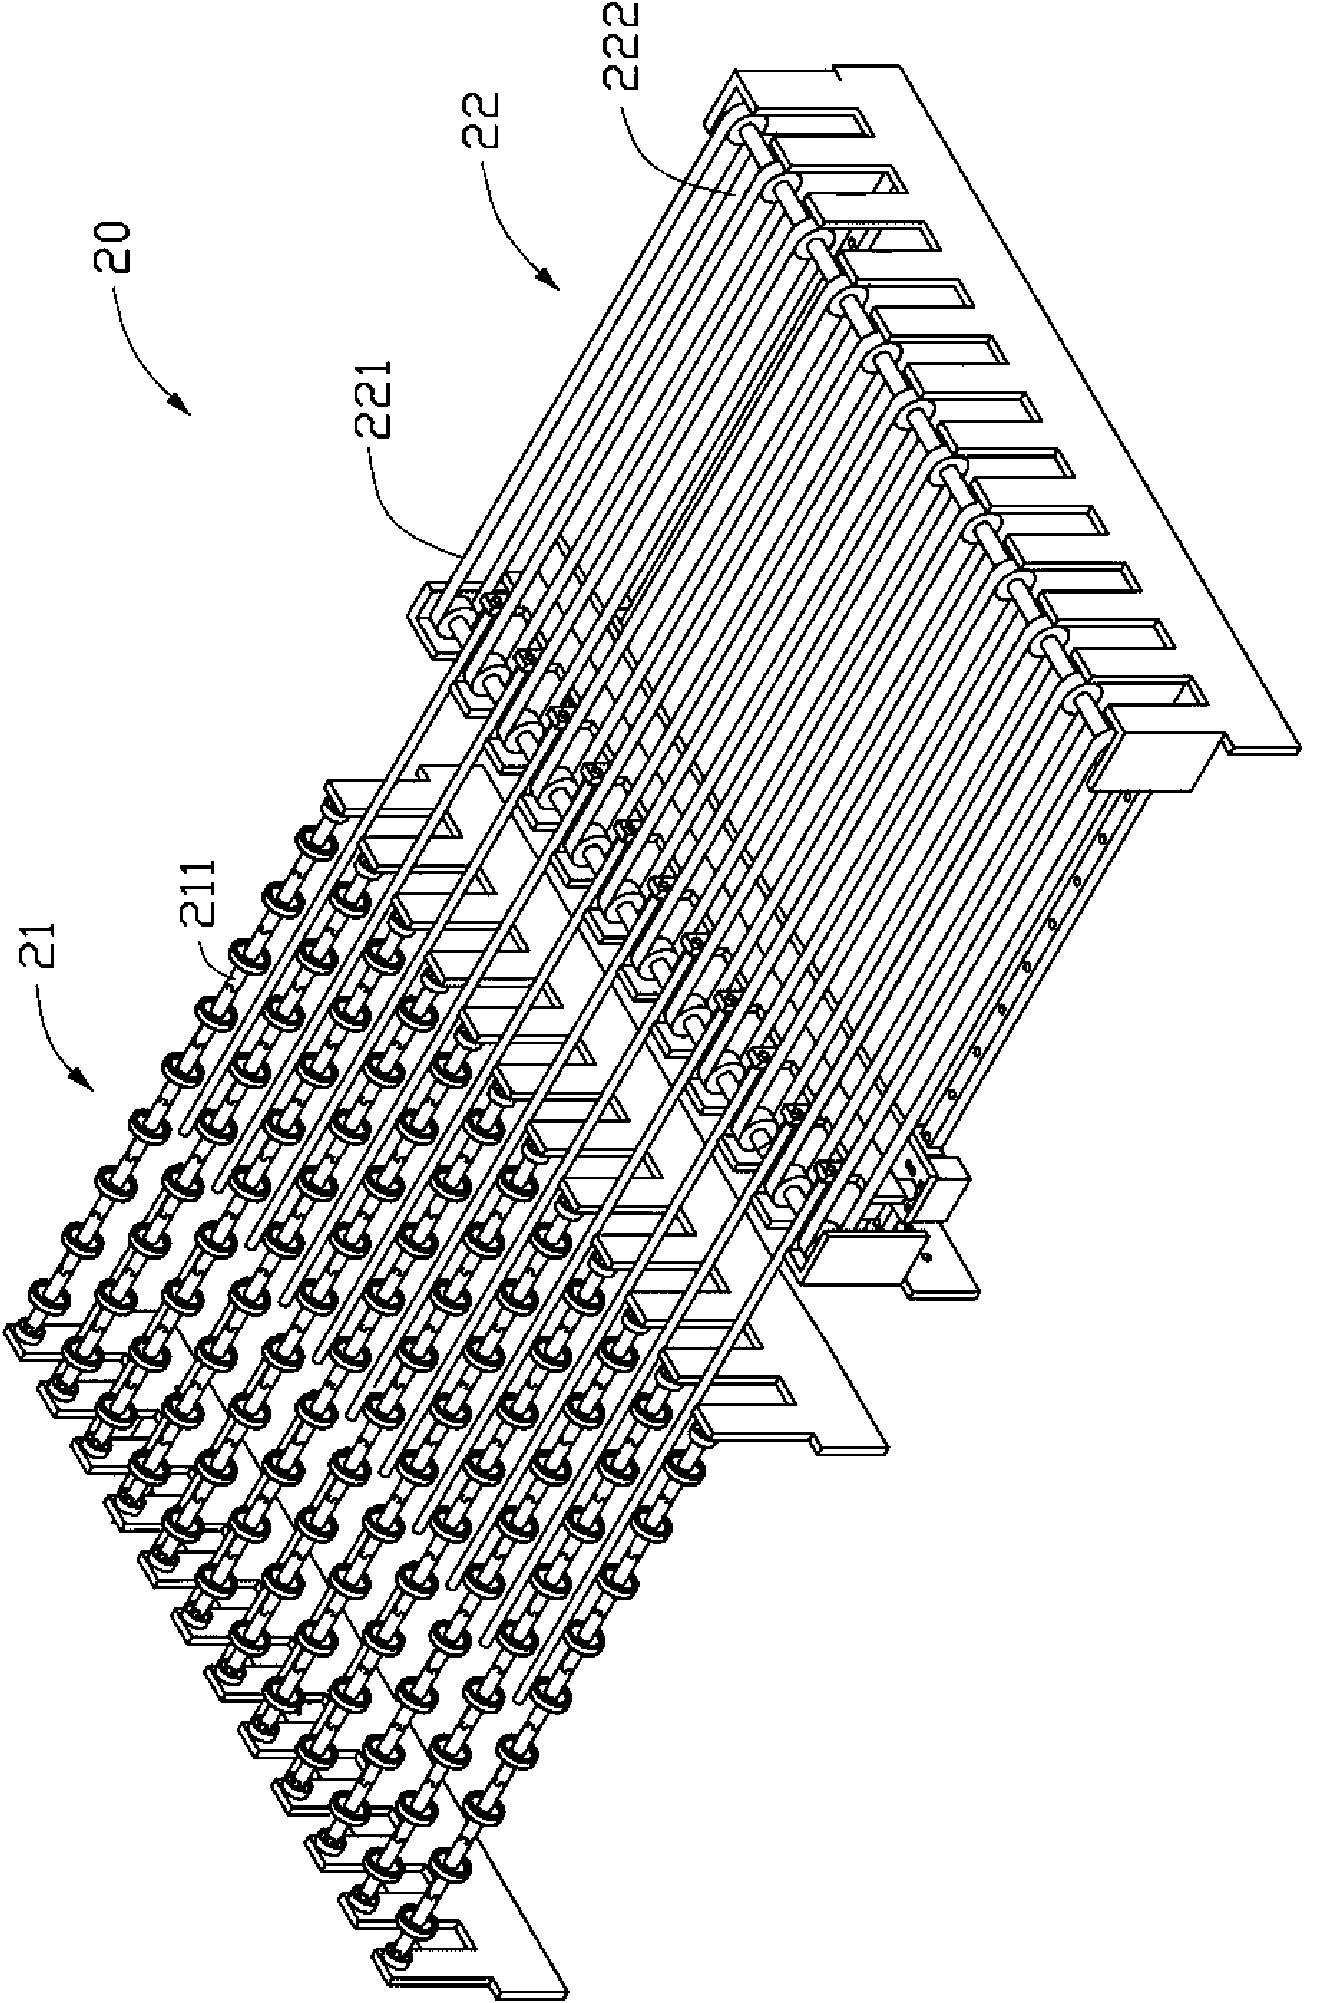 Substrate conveying system